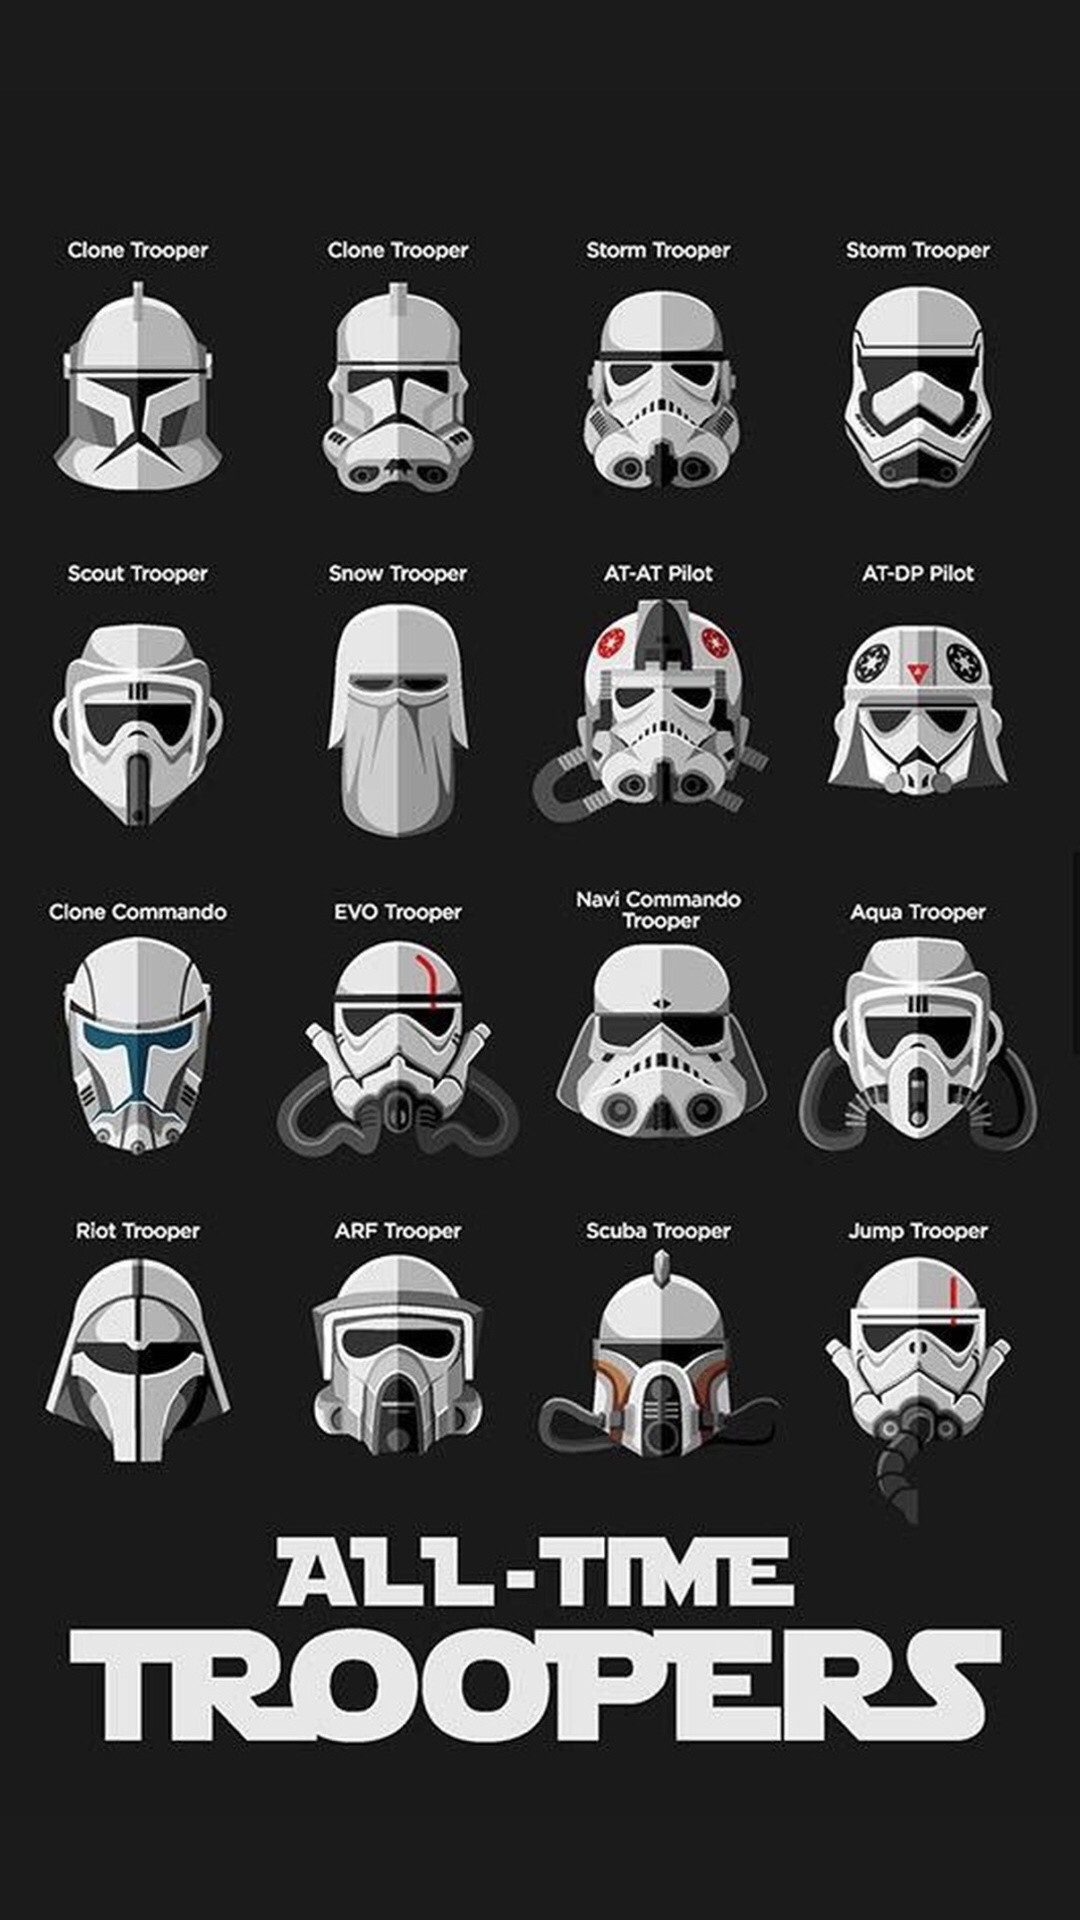 1080x1920 All-time storm troopers